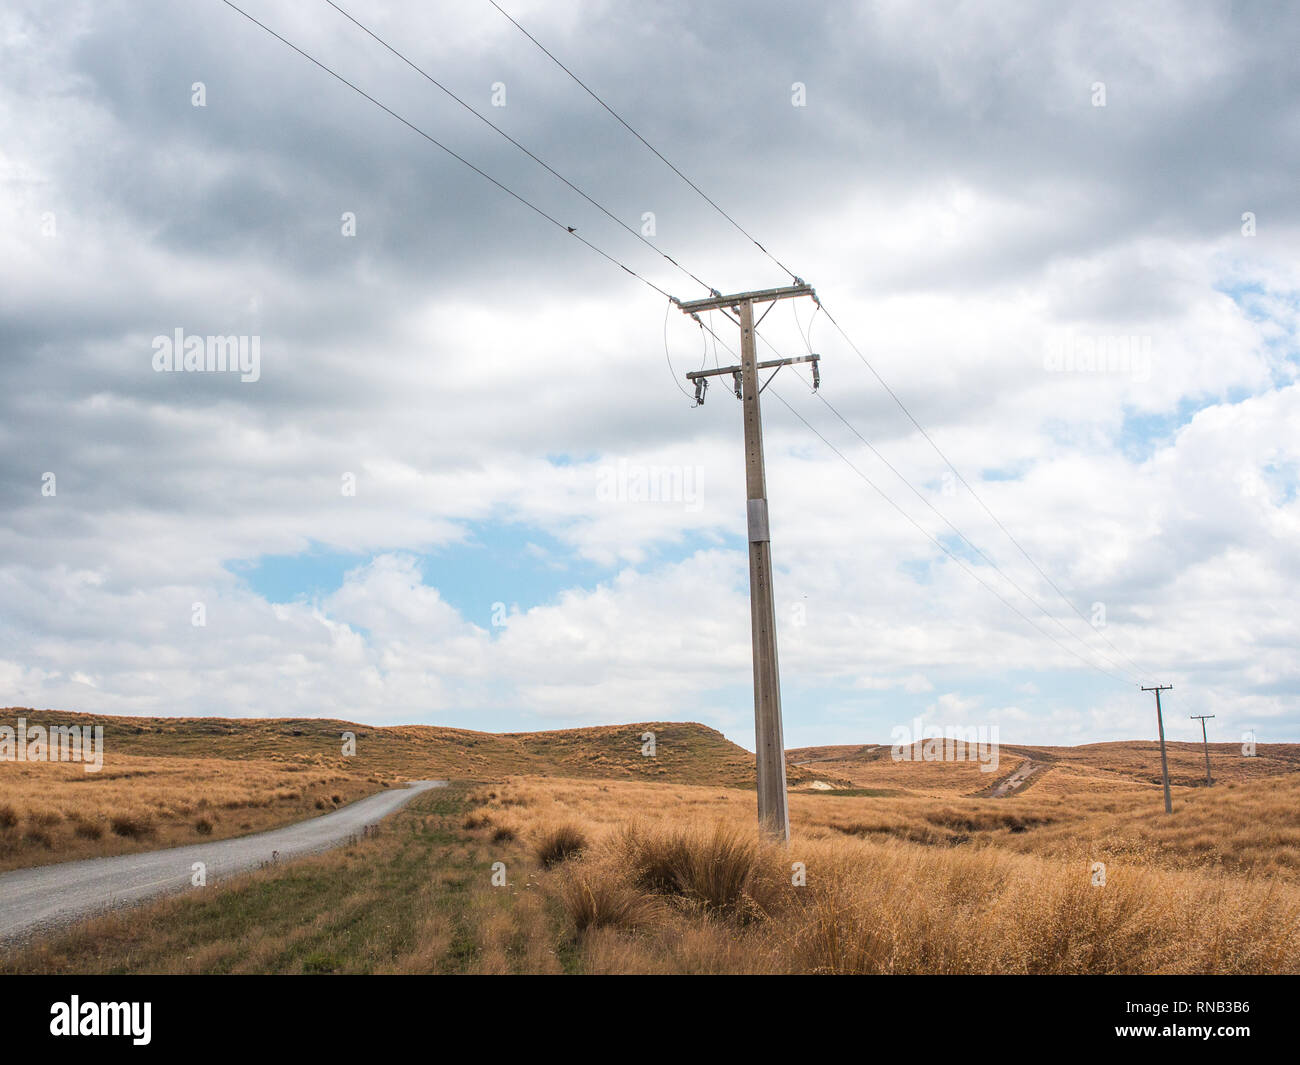 Power poles lines on an unsealed gravel road, tussock country, Ngamatea Station, Inland Mokai Patea, Central North Island, New Zealand Stock Photo